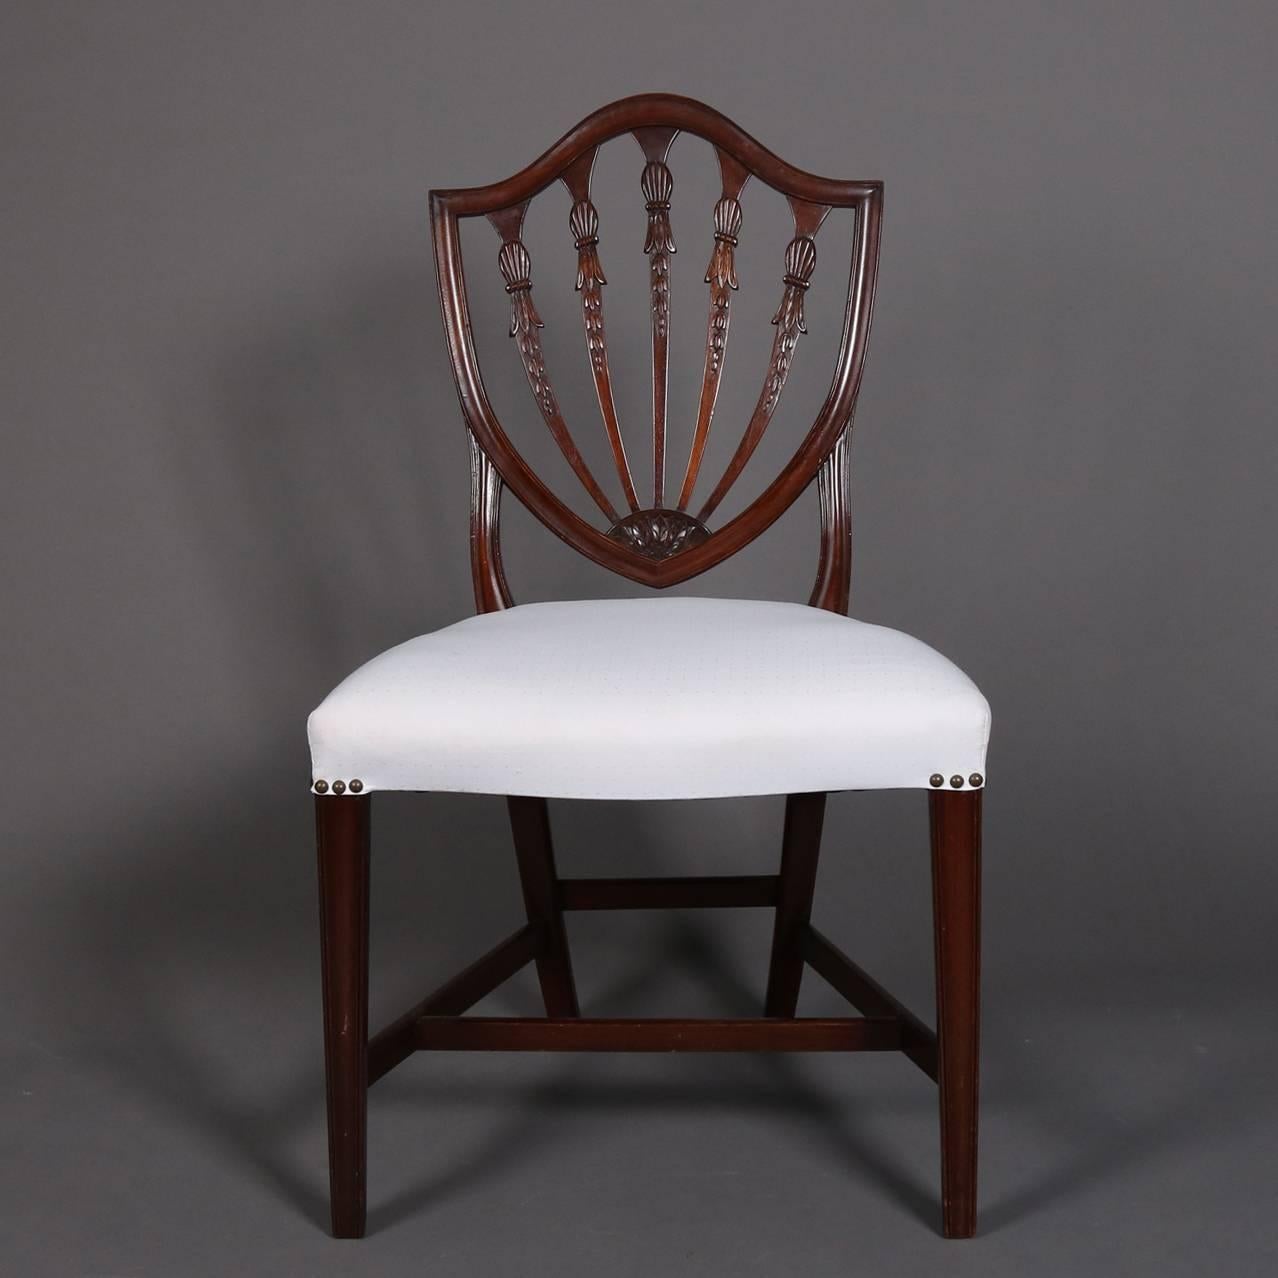 Set of six antique Federal mahogany shield back dining chairs feature carved tassel, inverted bellflowers and acanthus leaves, upholstered seats, 20th century.

Measure - 37.5"H X 21"W X 18"D, 17" seat height.